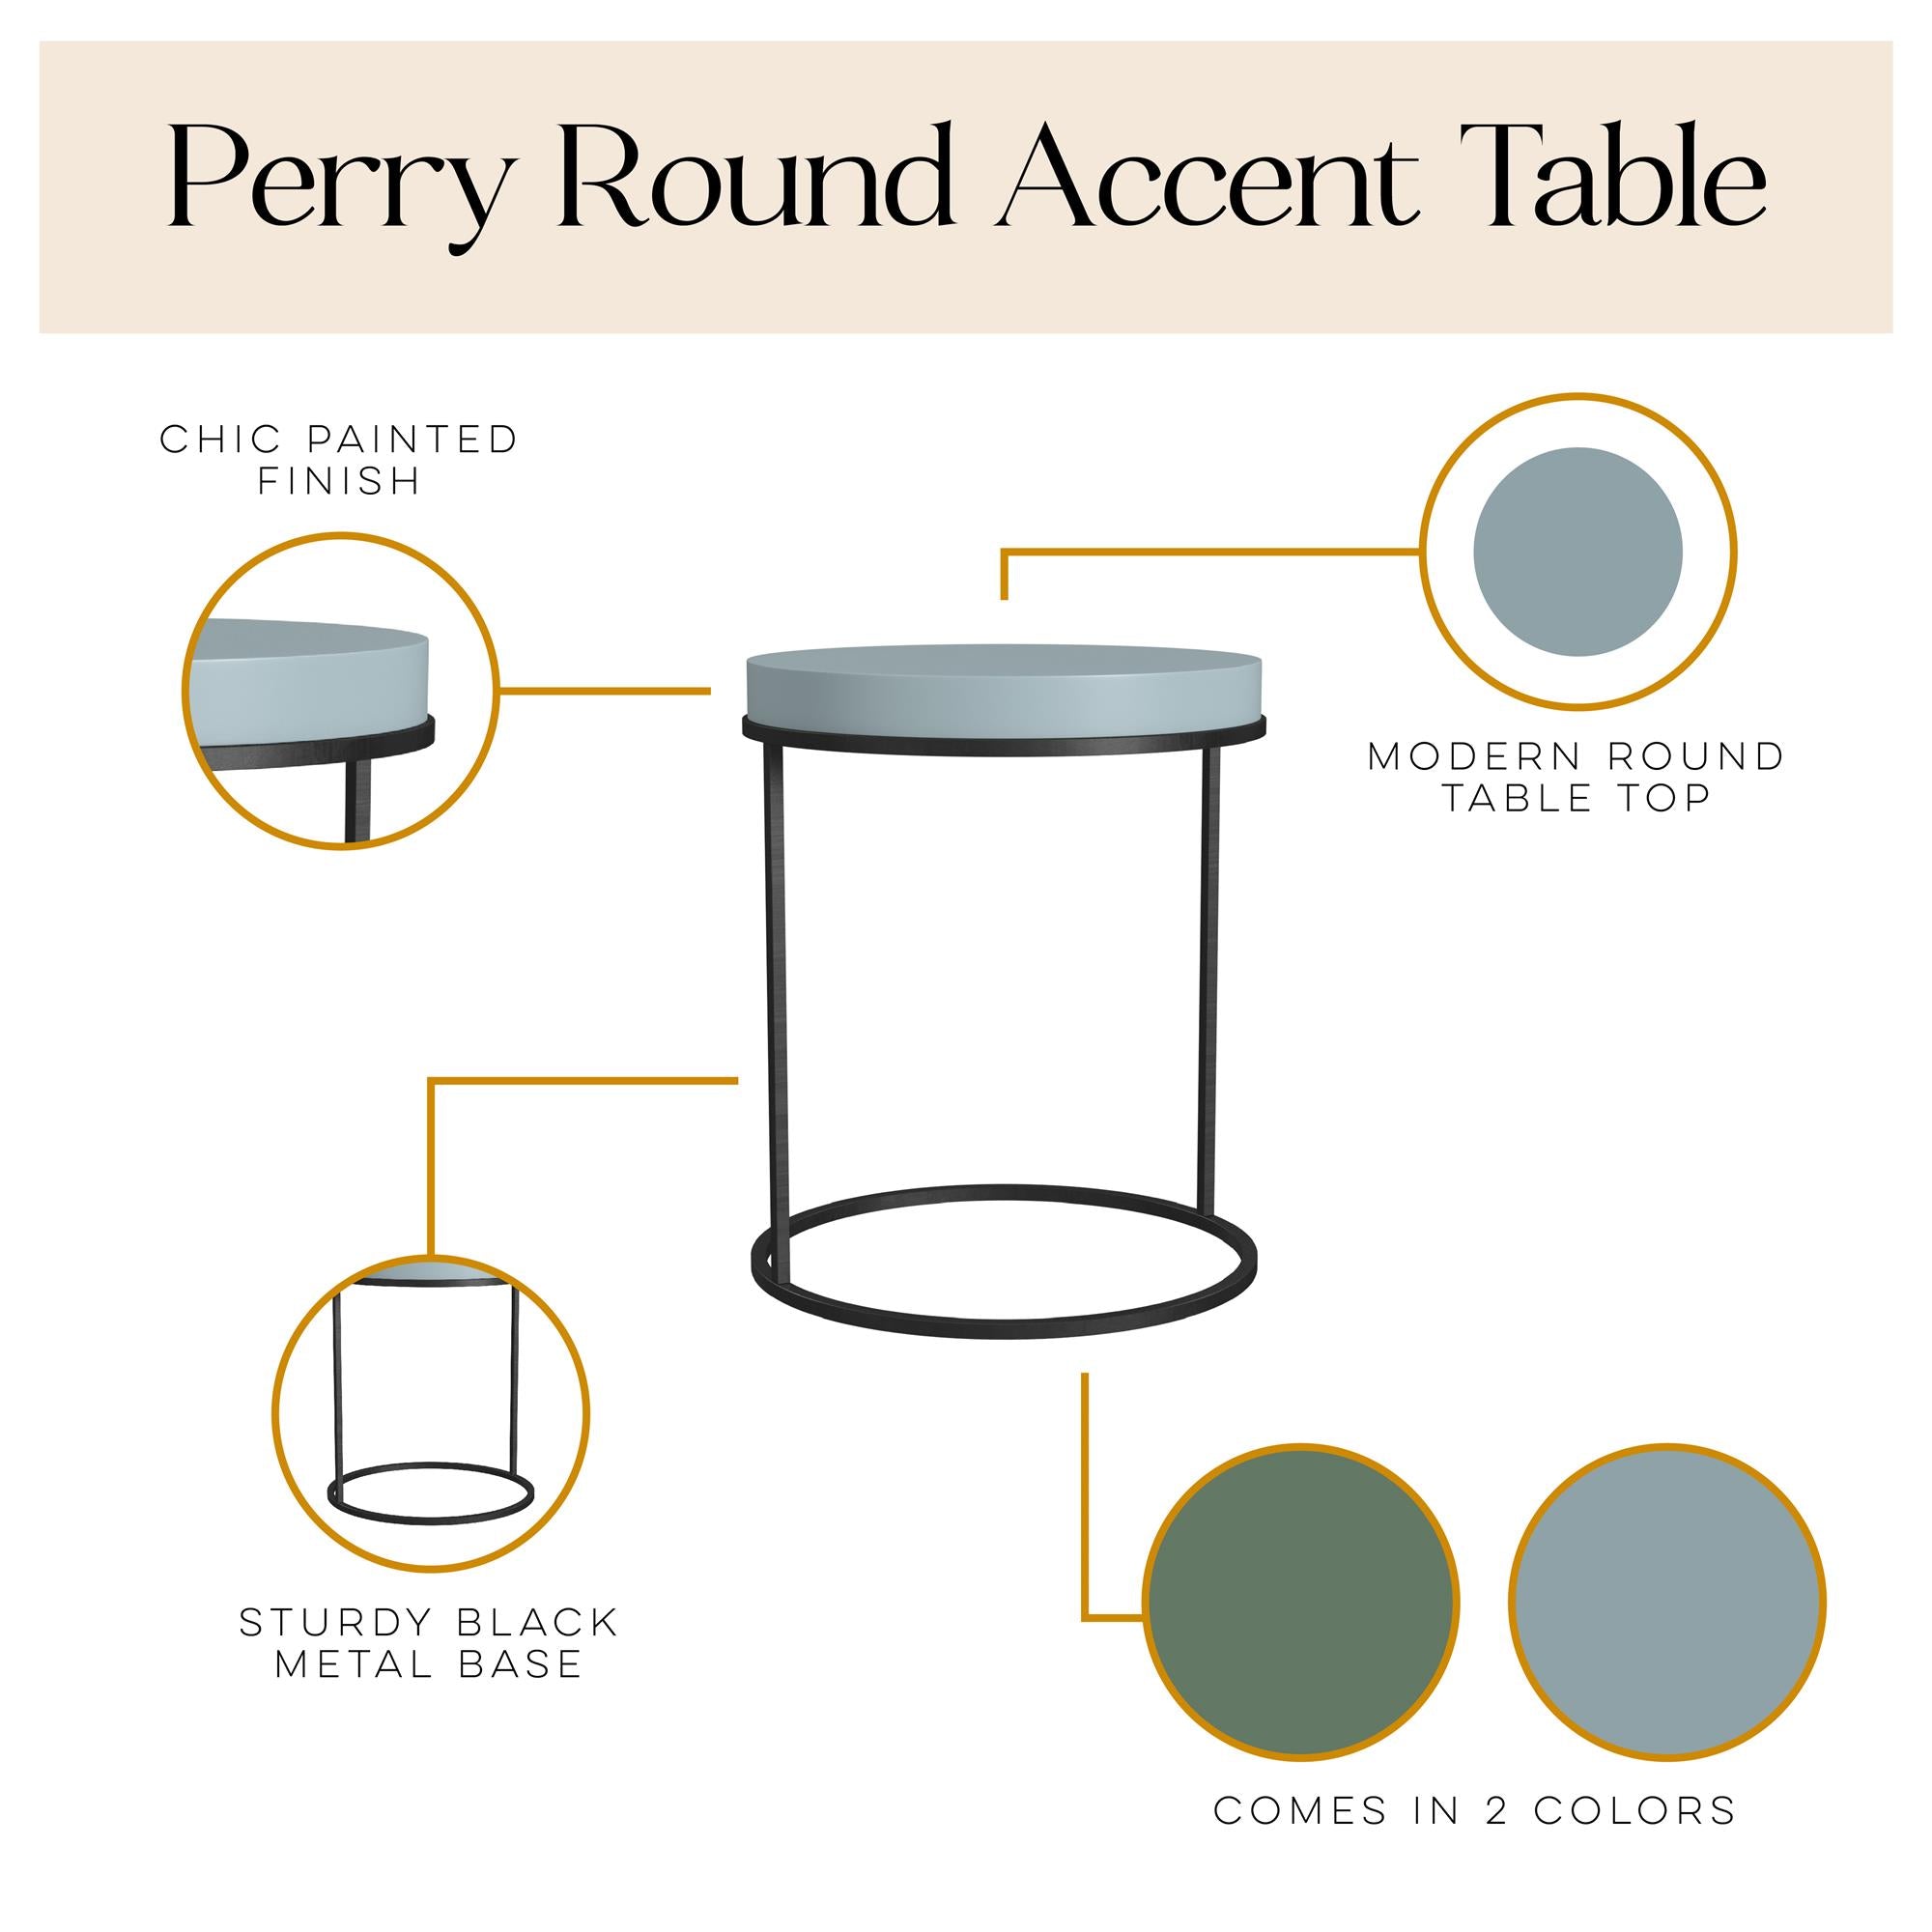 Perry Round Accent Table, Powder Blue - Powder Blue